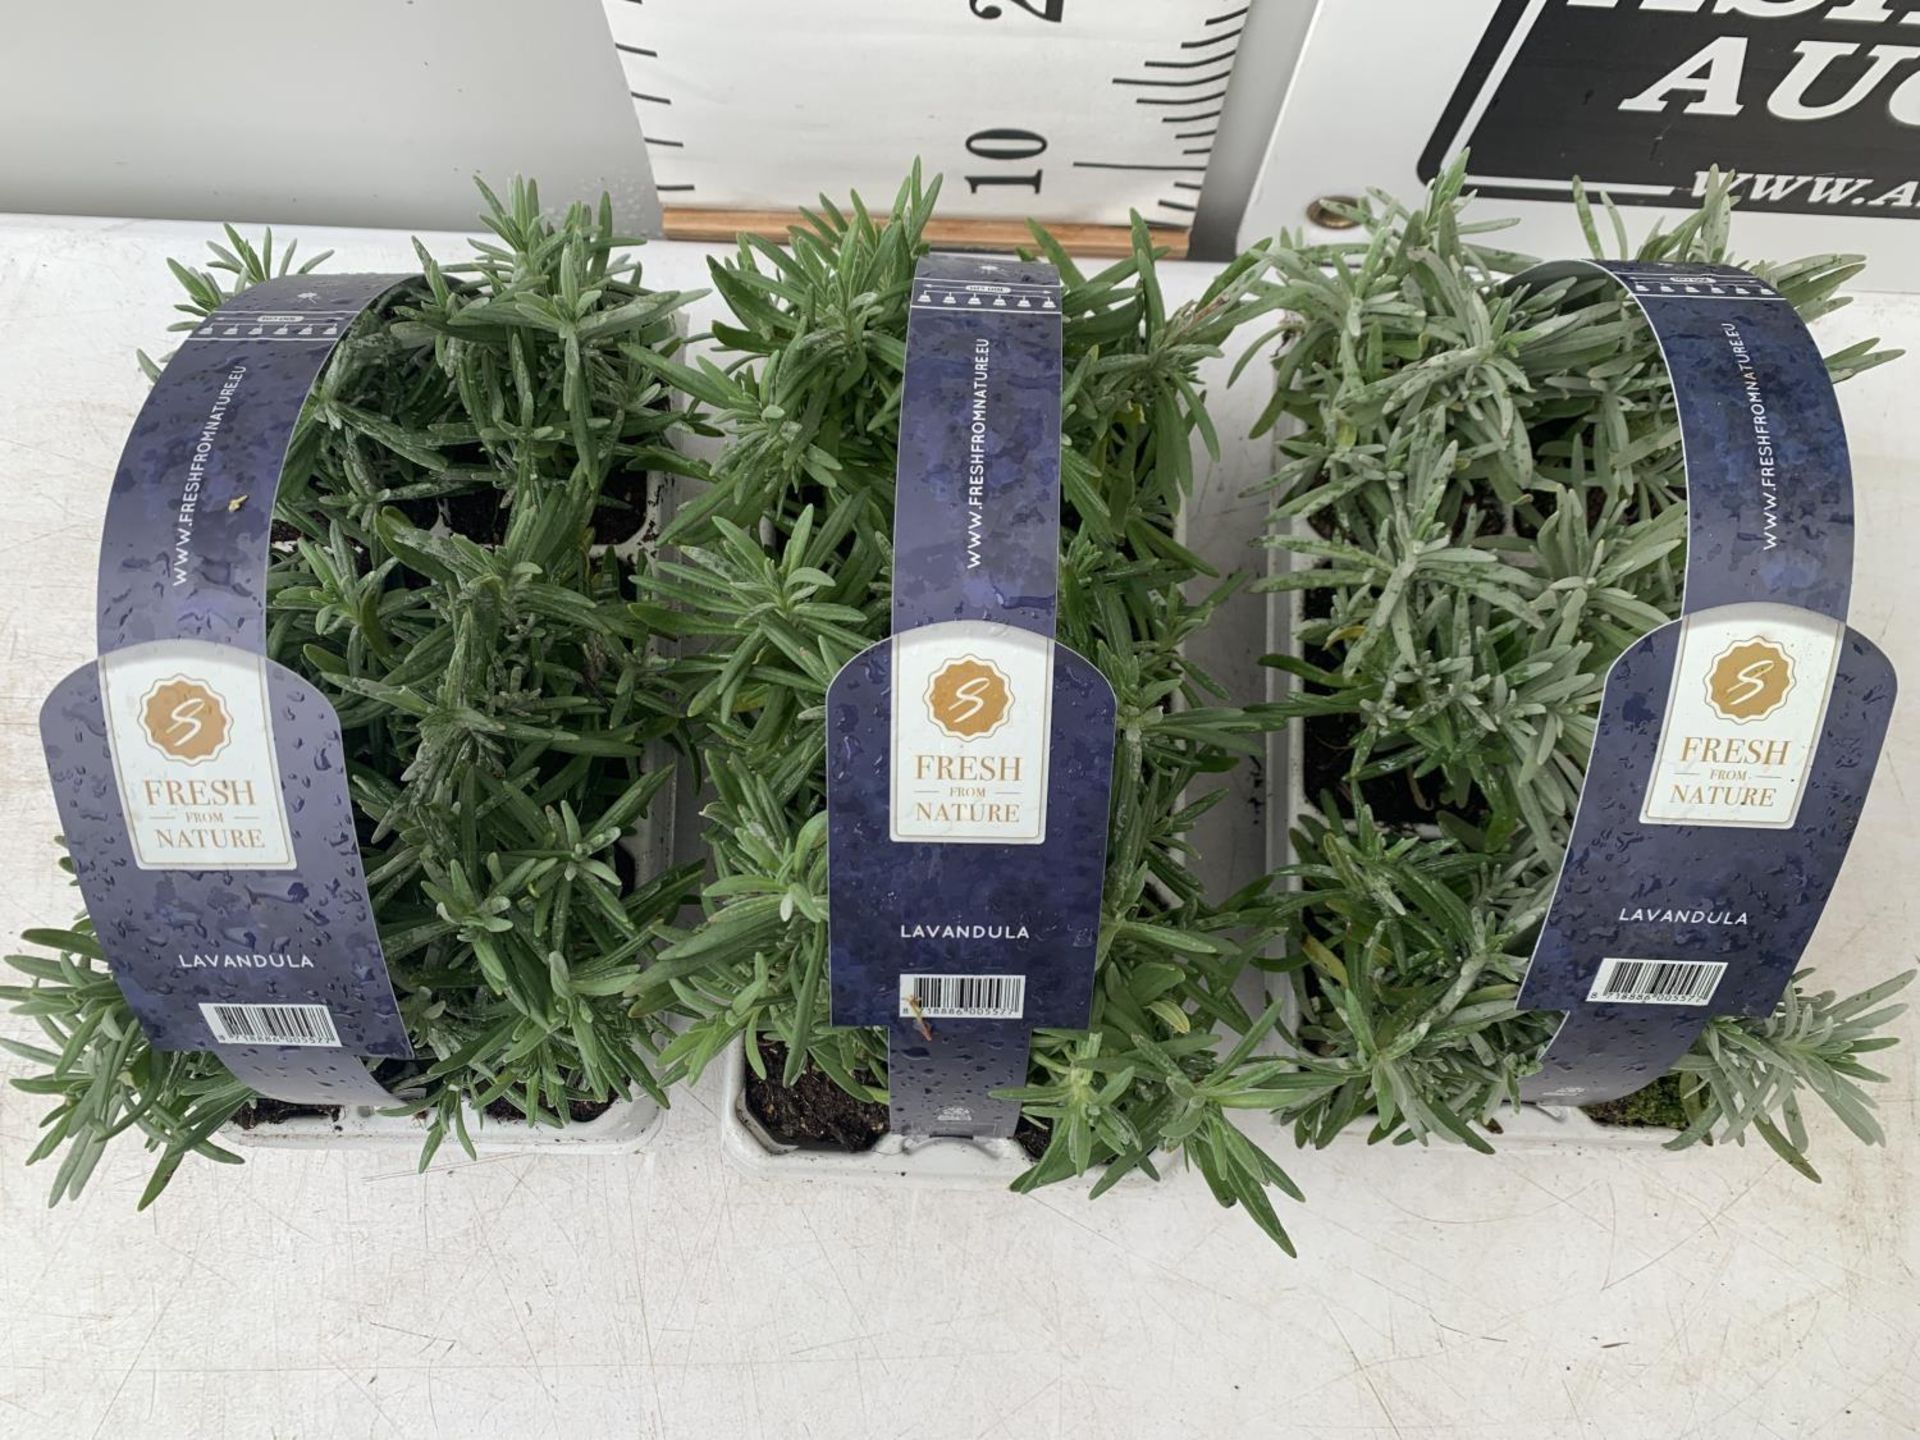 3 CARRY TRAYS OF PLUG LAVENDERS 18 PLANTS IN TOTAL PLUS VAT TO BE SOLD FOR THE THREE TRAYS - Image 4 of 6